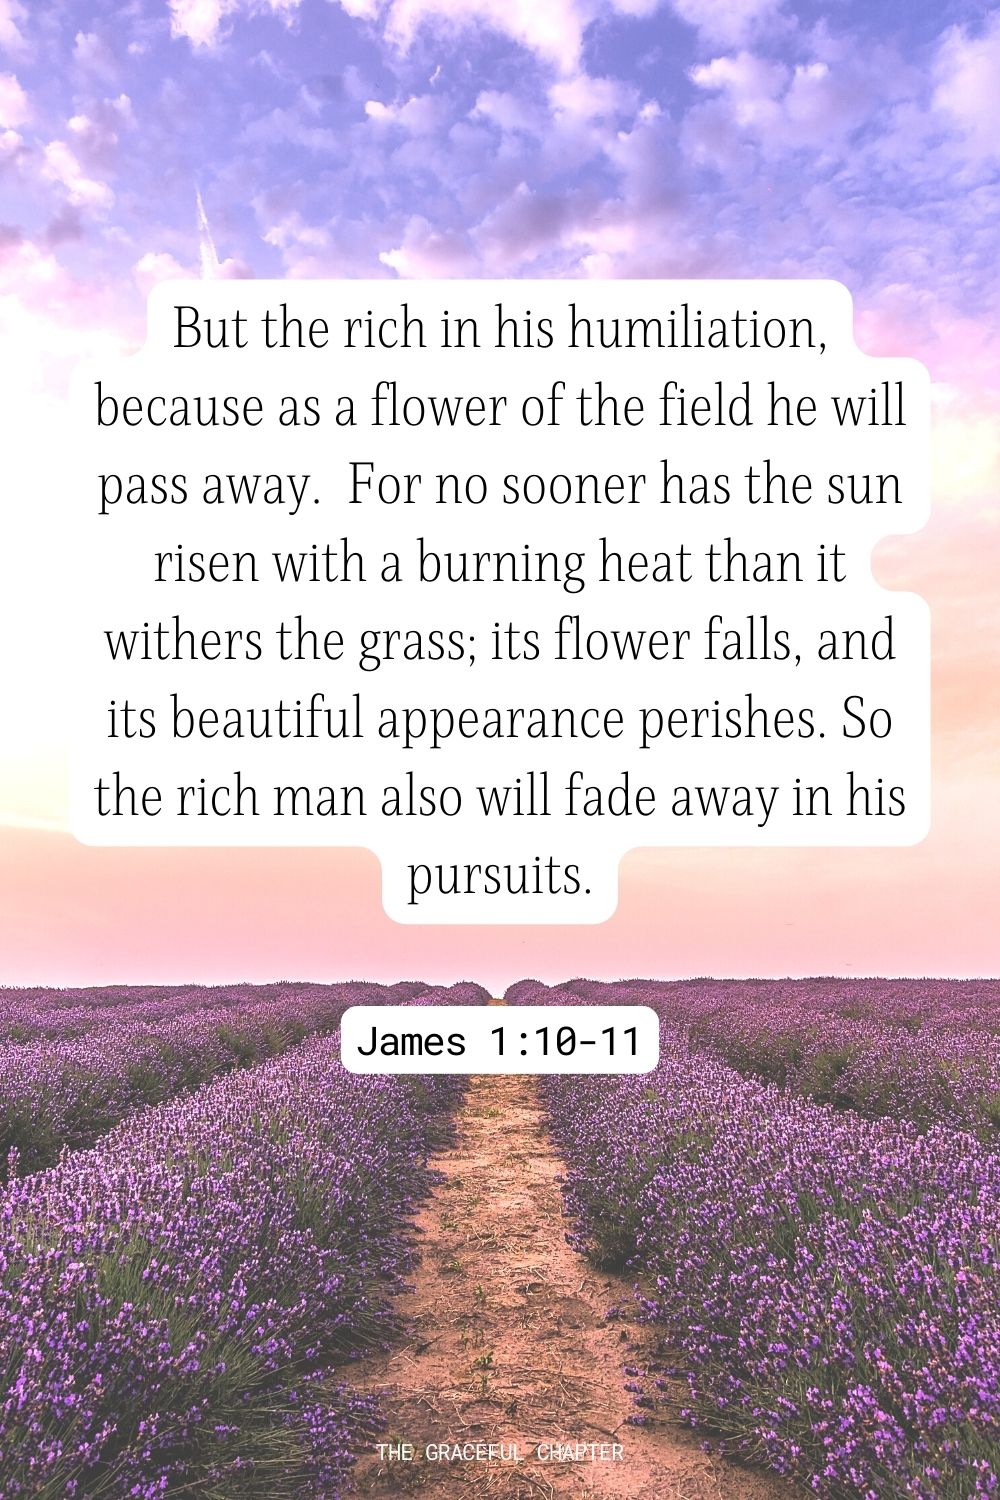 But the rich in his humiliation, because as a flower of the field he will pass away.  For no sooner has the sun risen with a burning heat than it withers the grass; its flower falls, and its beautiful appearance perishes. So the rich man also will fade away in his pursuits. James 1:10-11